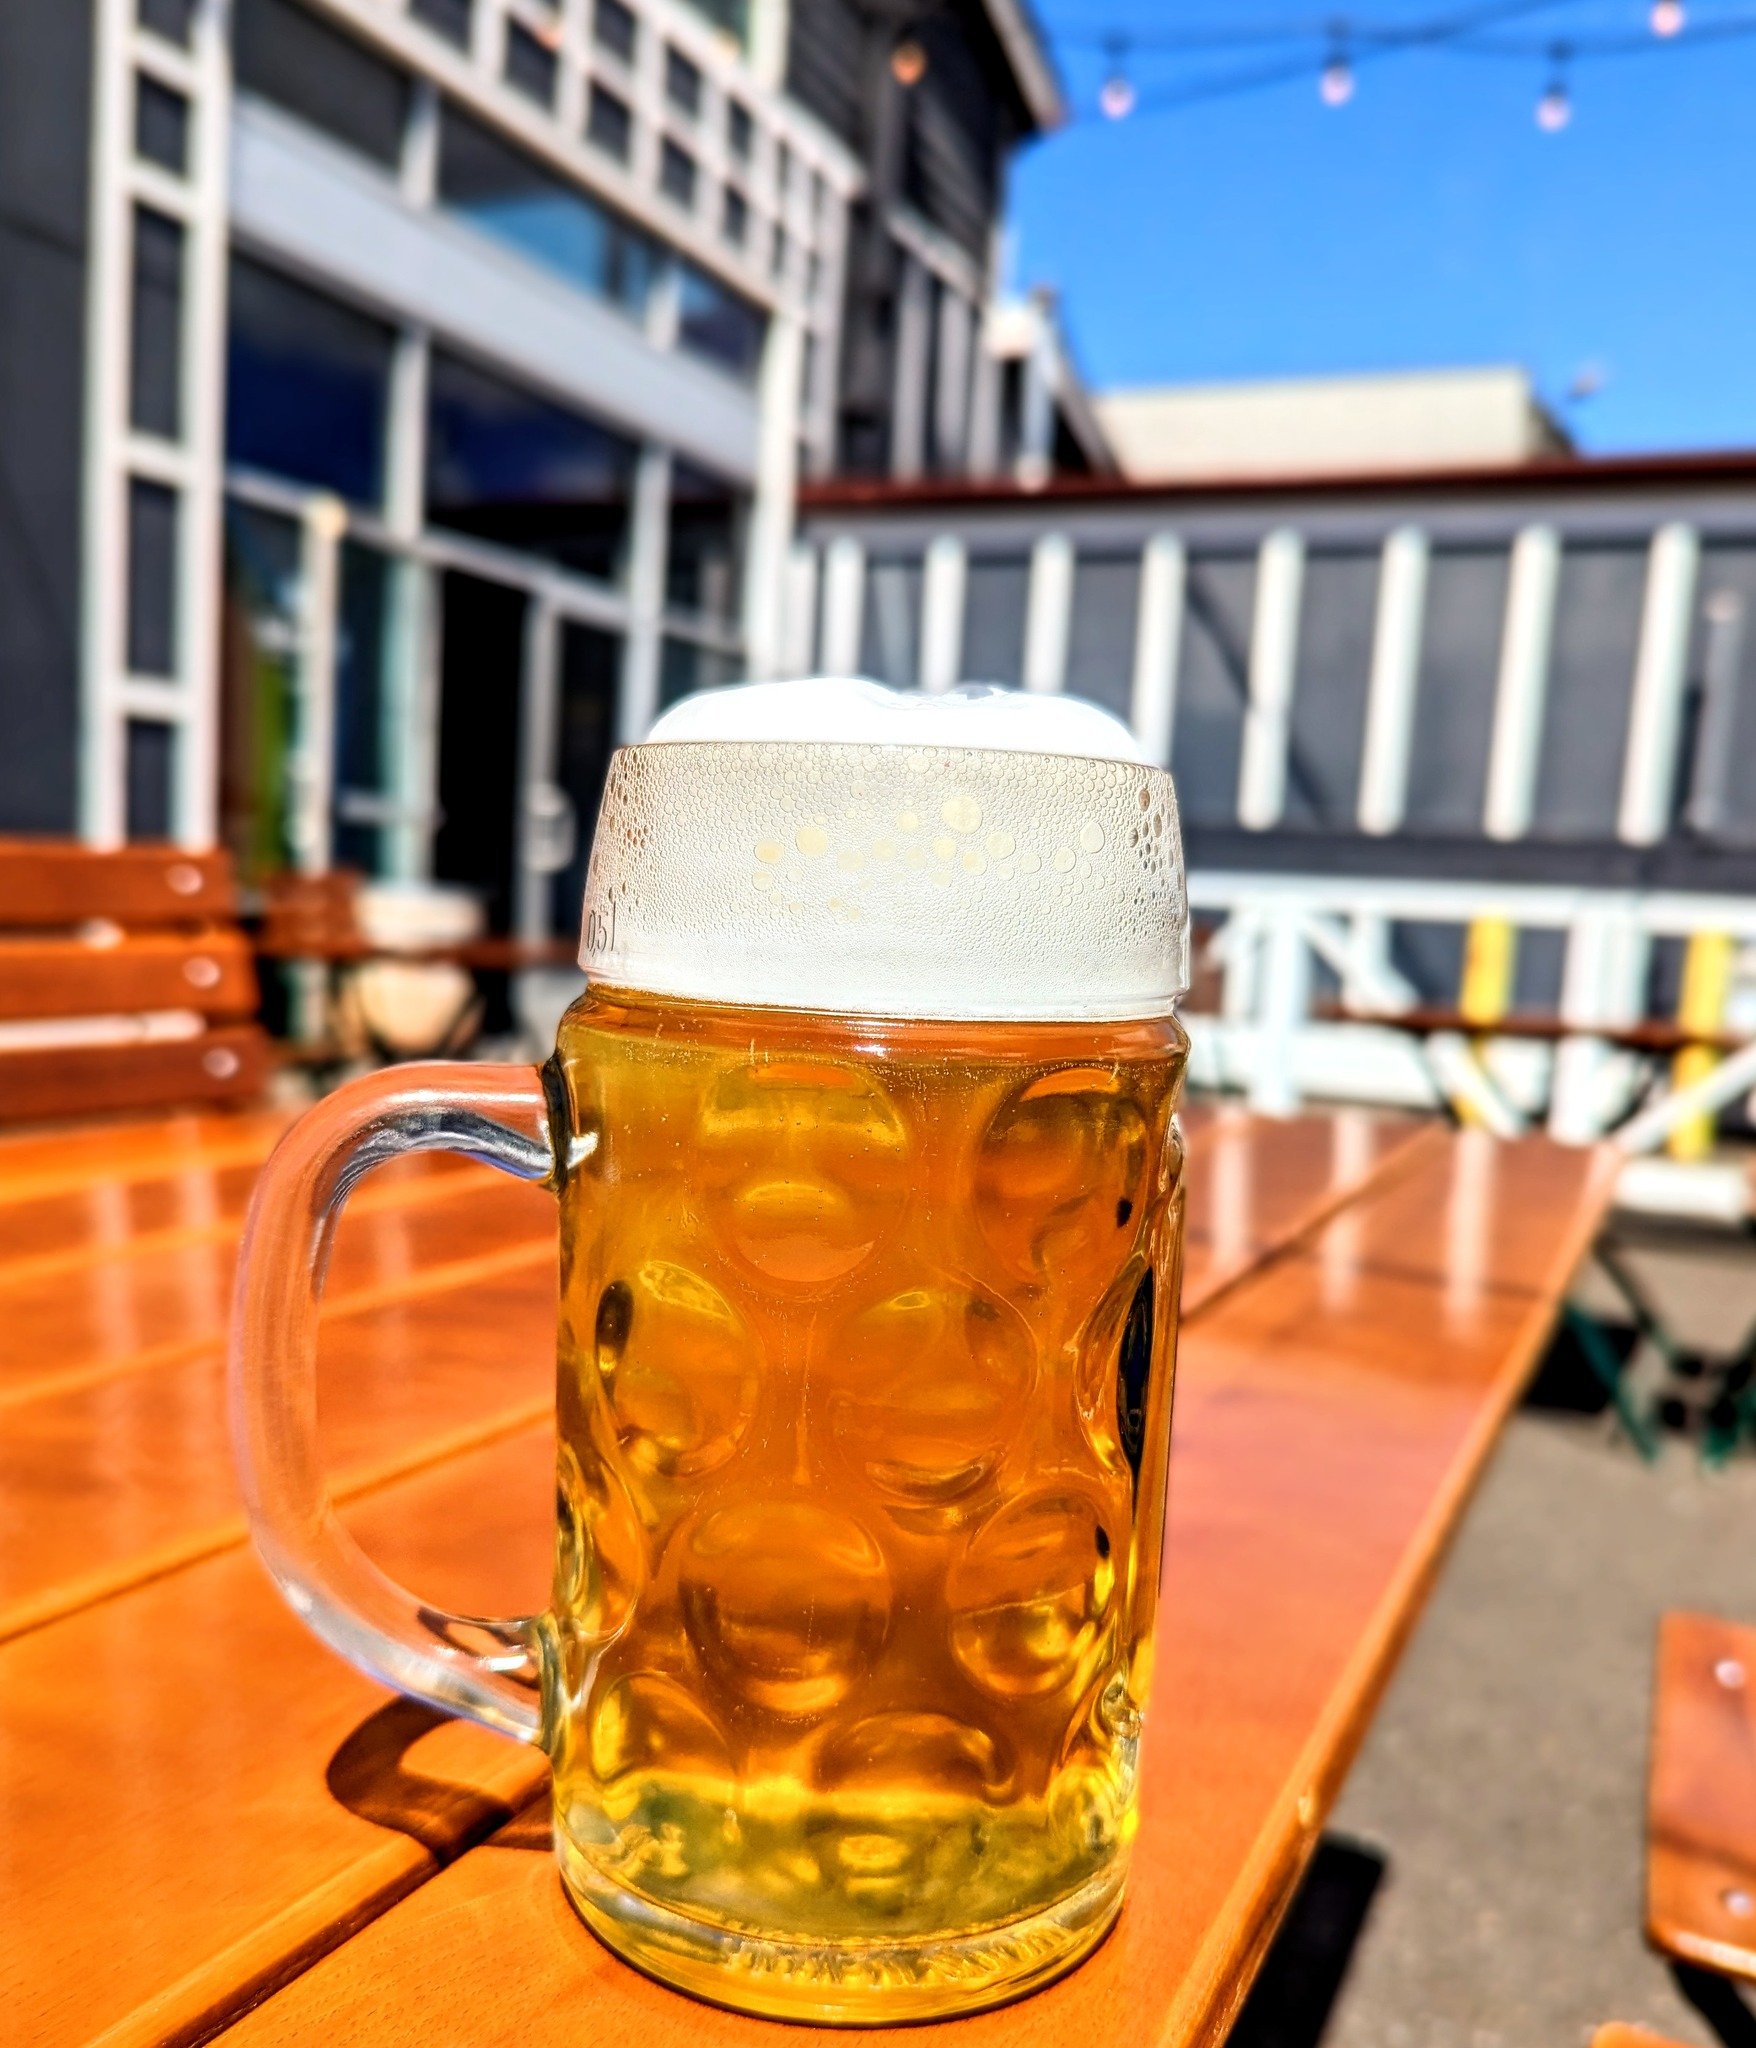 patio weather? 👀🌞 patio weather 😎
c'mon down for a cold stein of pilsner in the sun!
.
.
 #craftbeerporn #craftbeerlife #craftbeerlover #beerporn #beerstagram #seattlebrewewries #seattlecraftbeer #craftbrewery #seapinebrewing #seattlebrewery #wacr